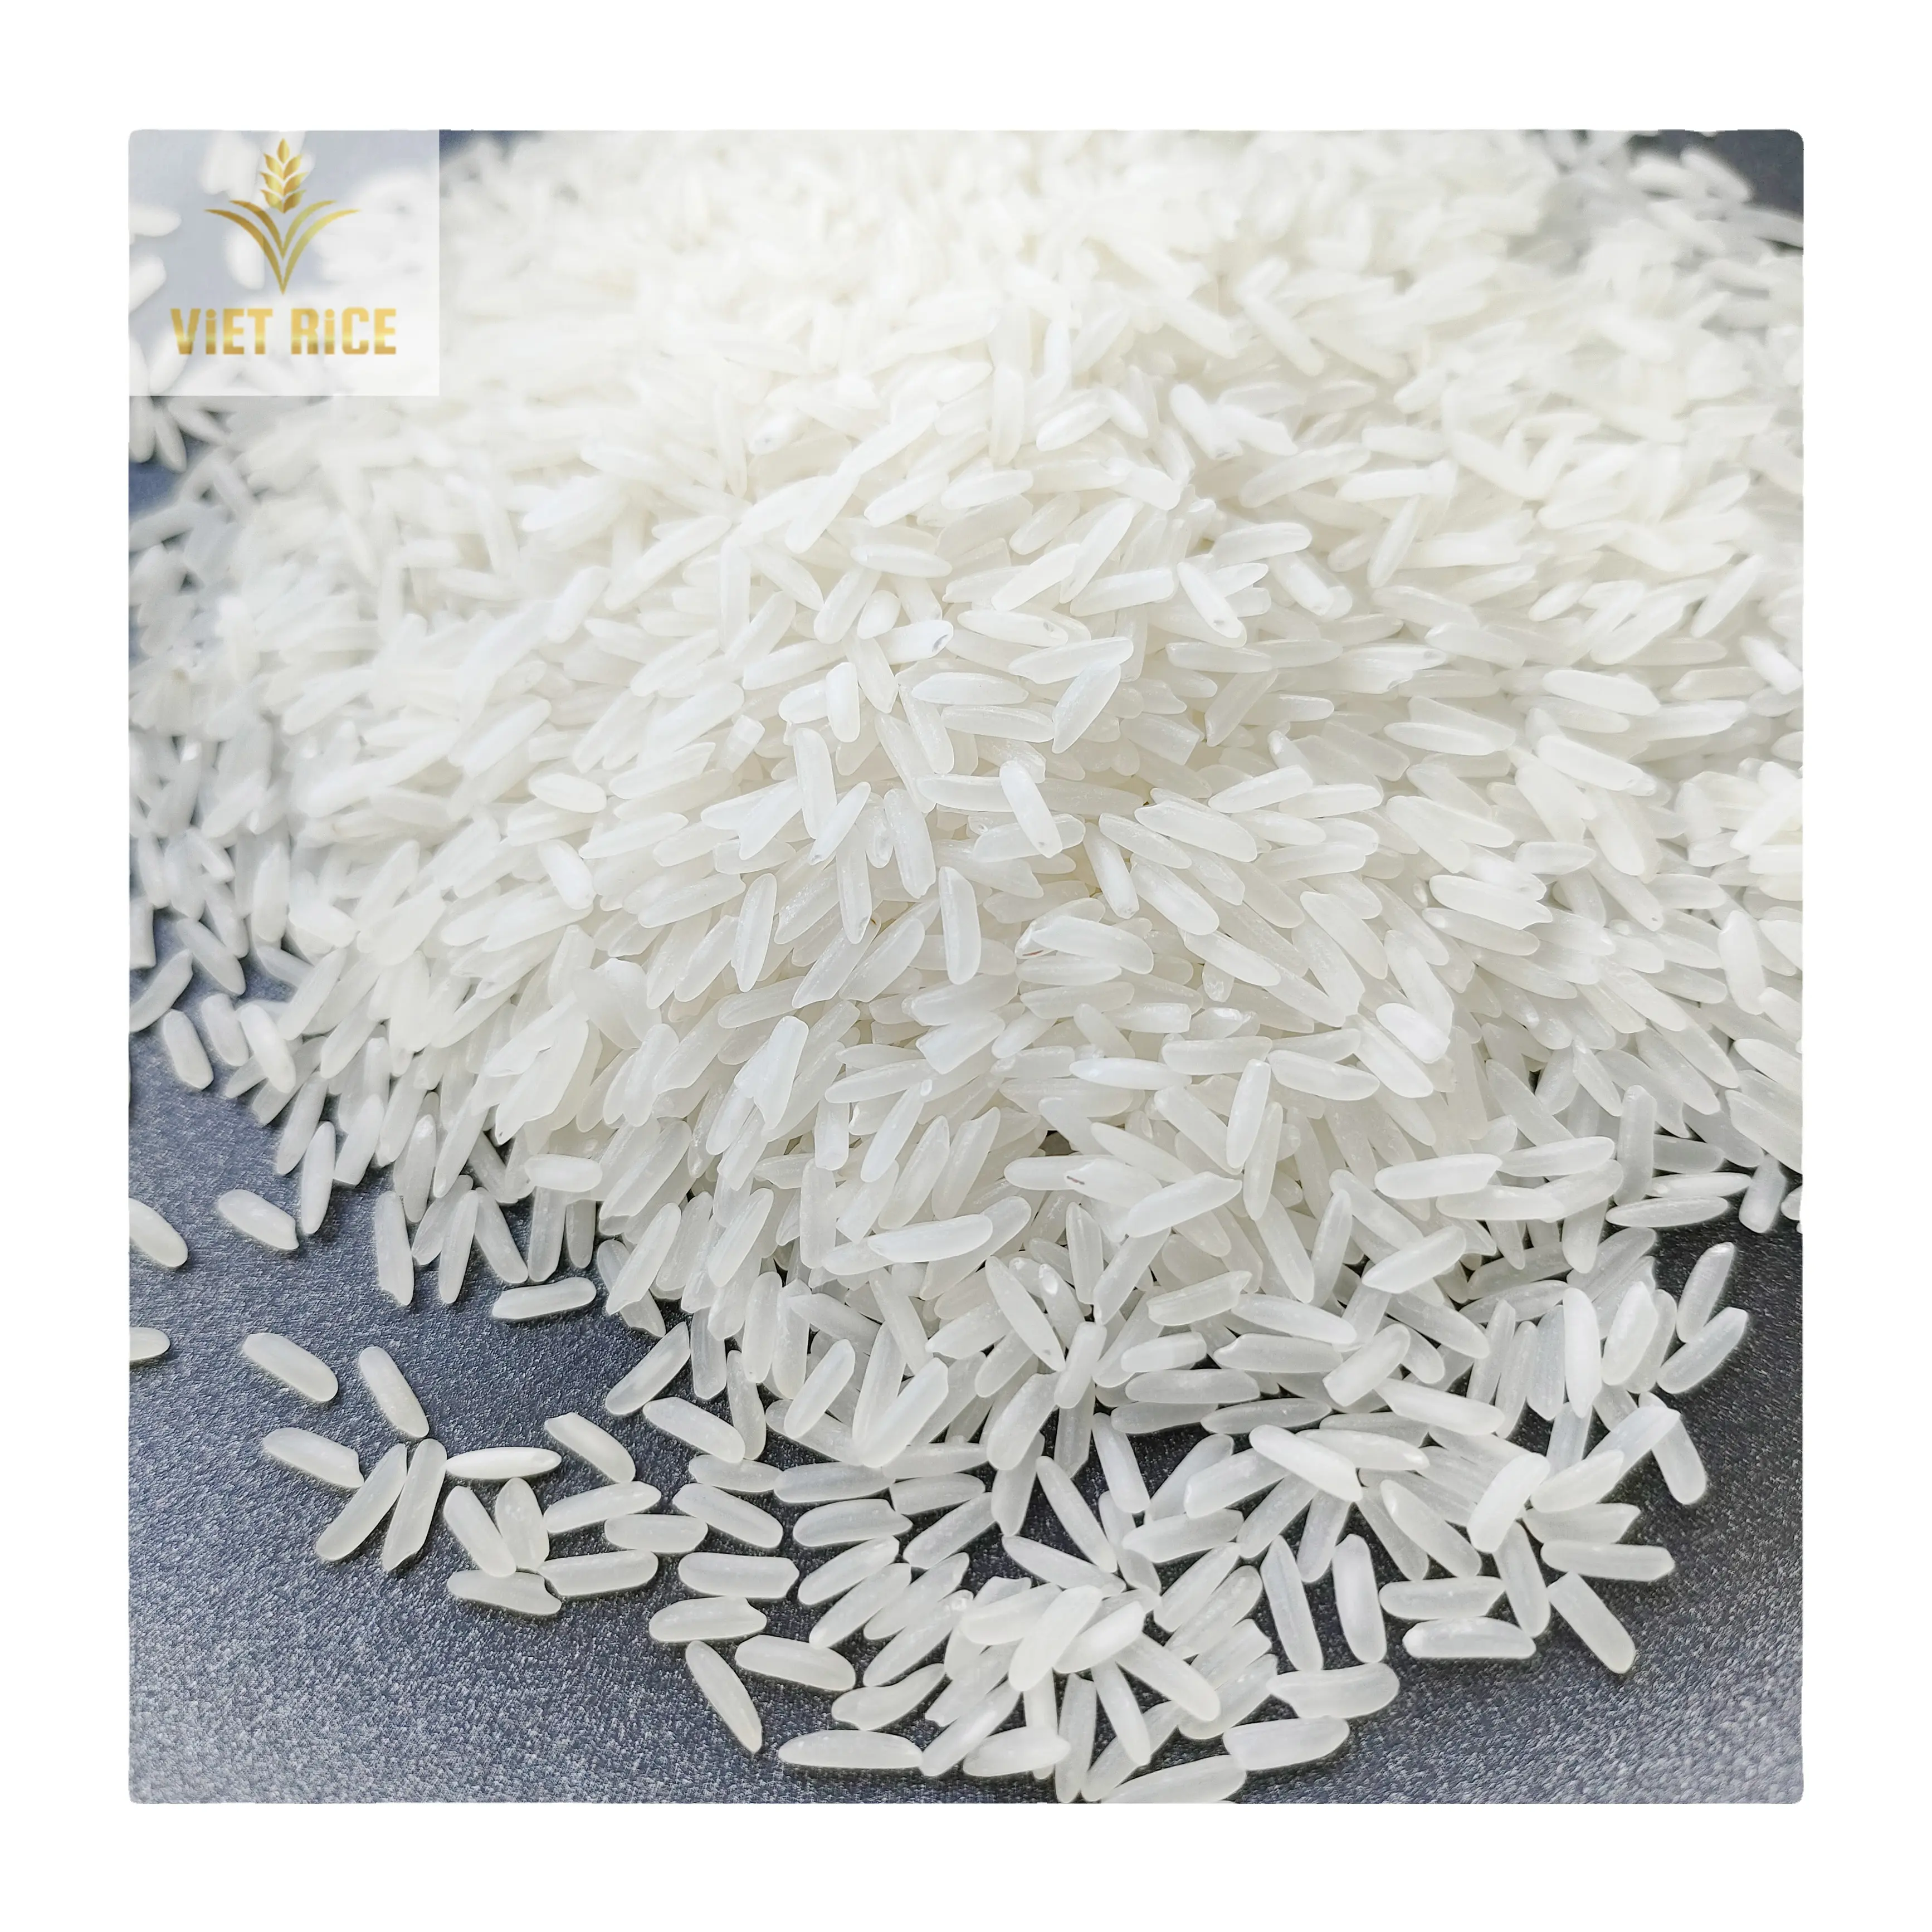 BEST SELLING PRICE - Vietnamese RICE KDM 5% Broken White Rice Long Grain Rice With PREMIUM QUANTITY Export Directly Factory